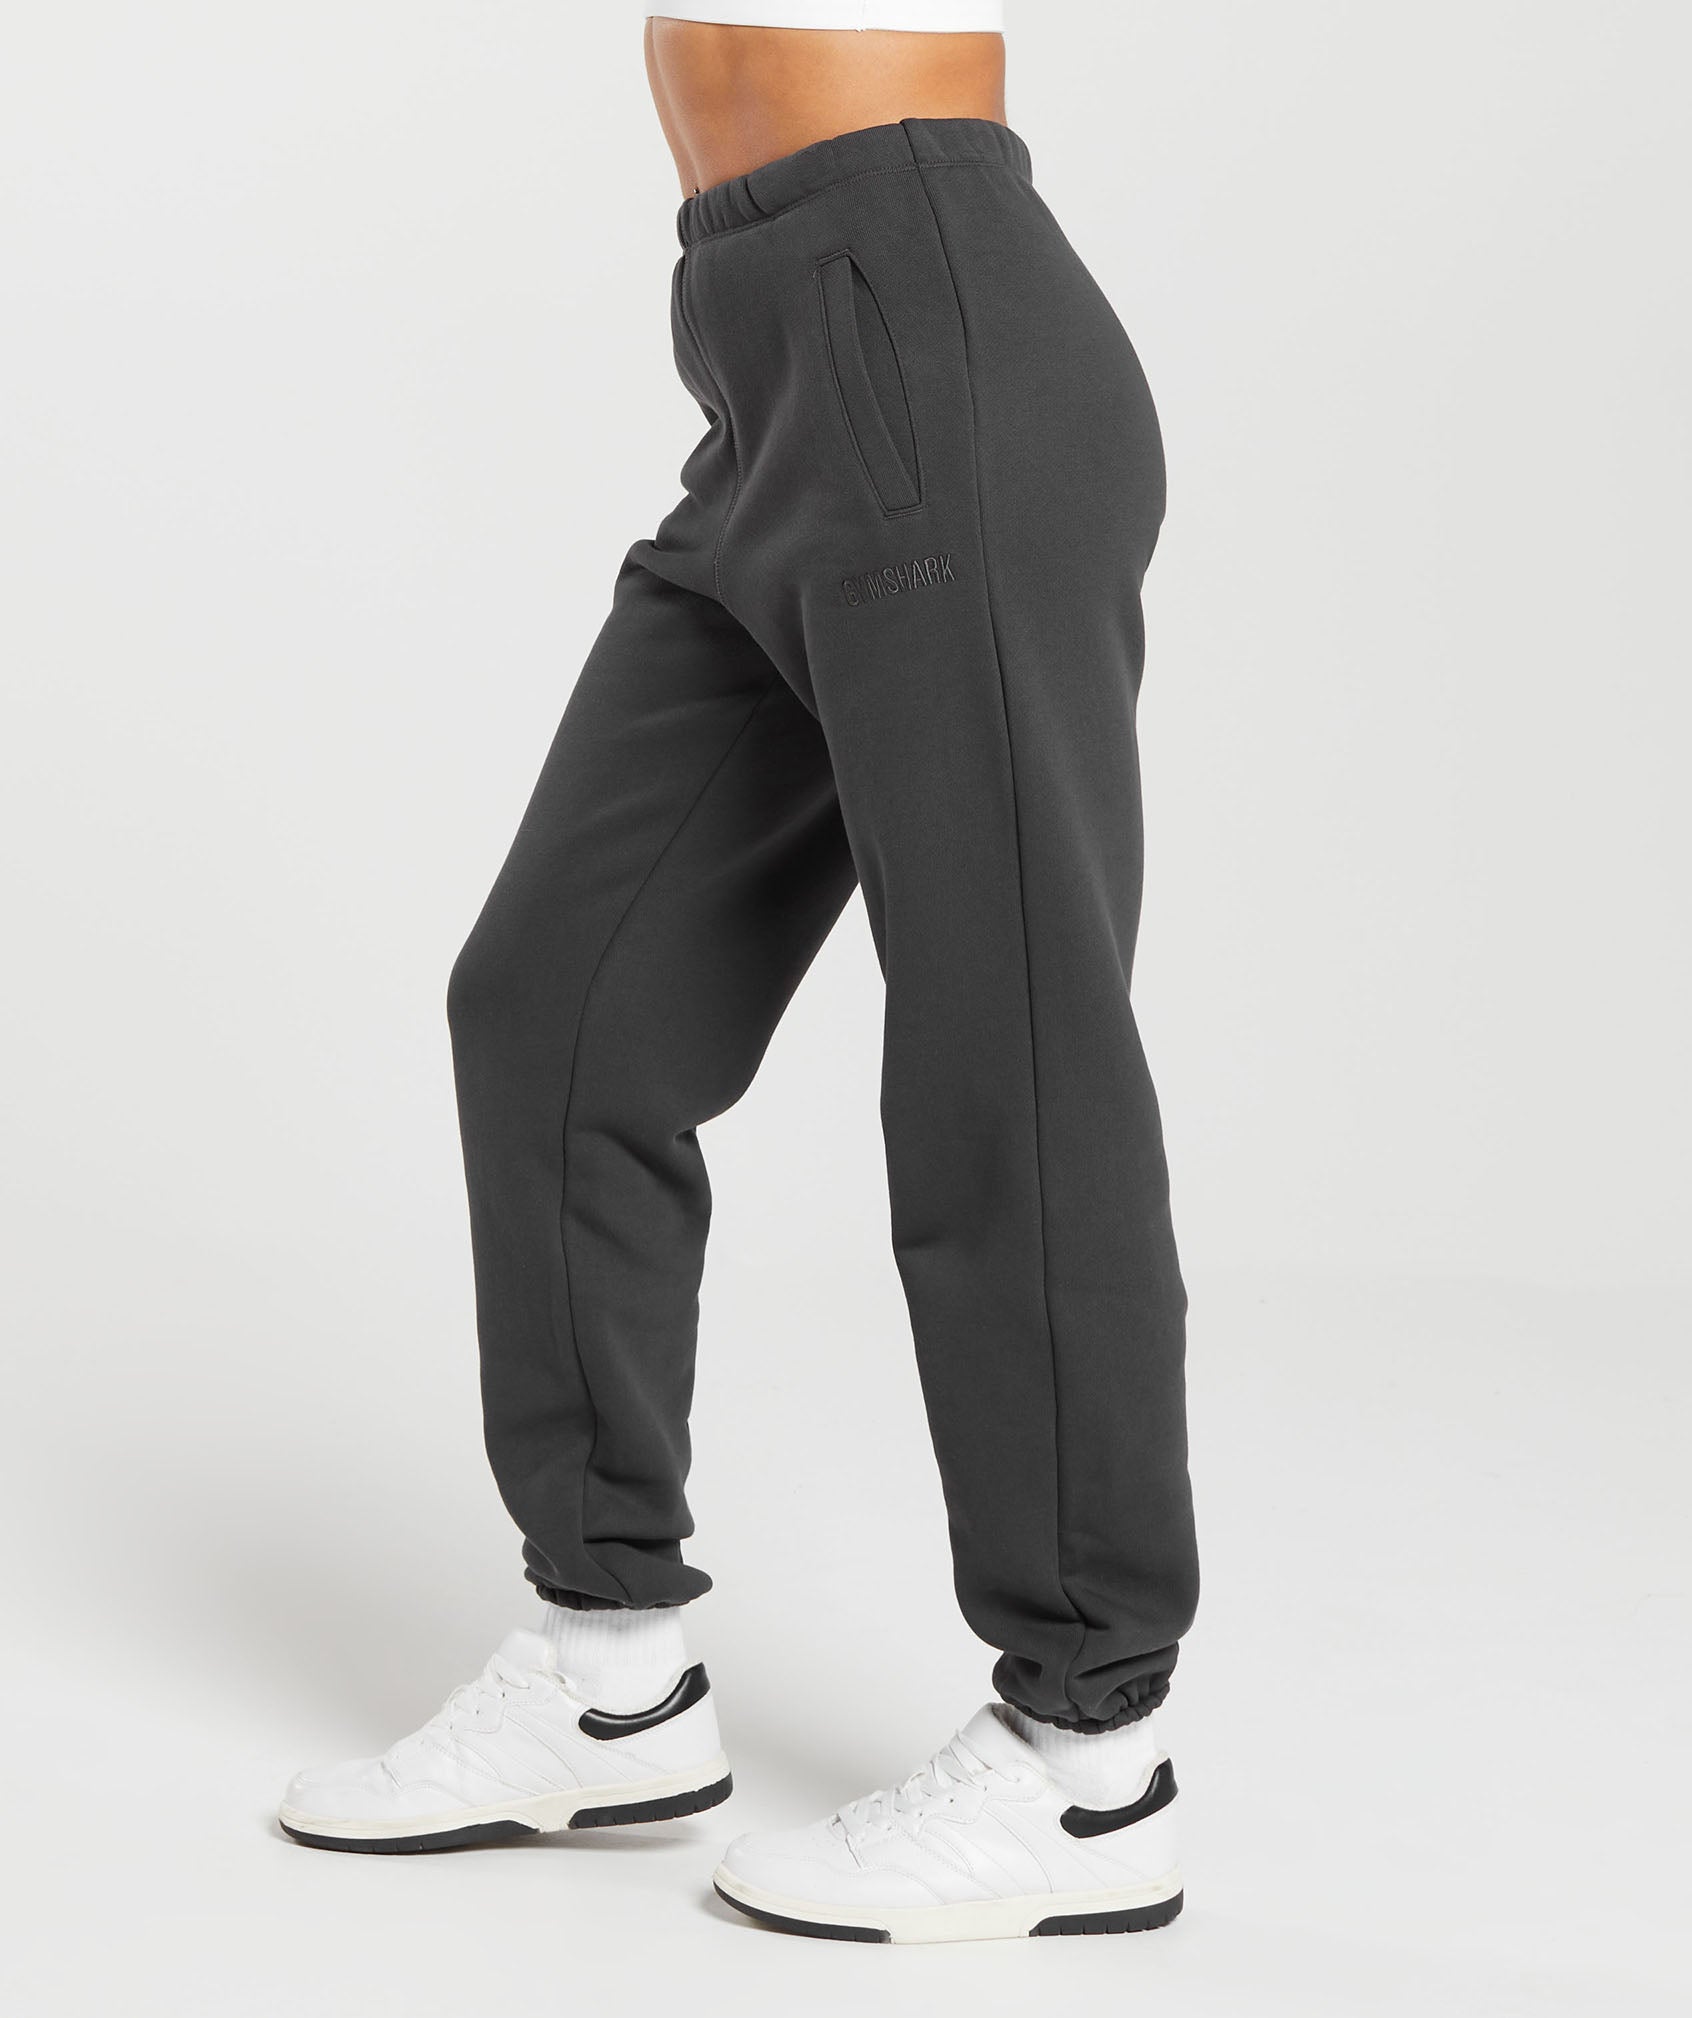 Joggers for women LMB high waisted joggers for women for casual